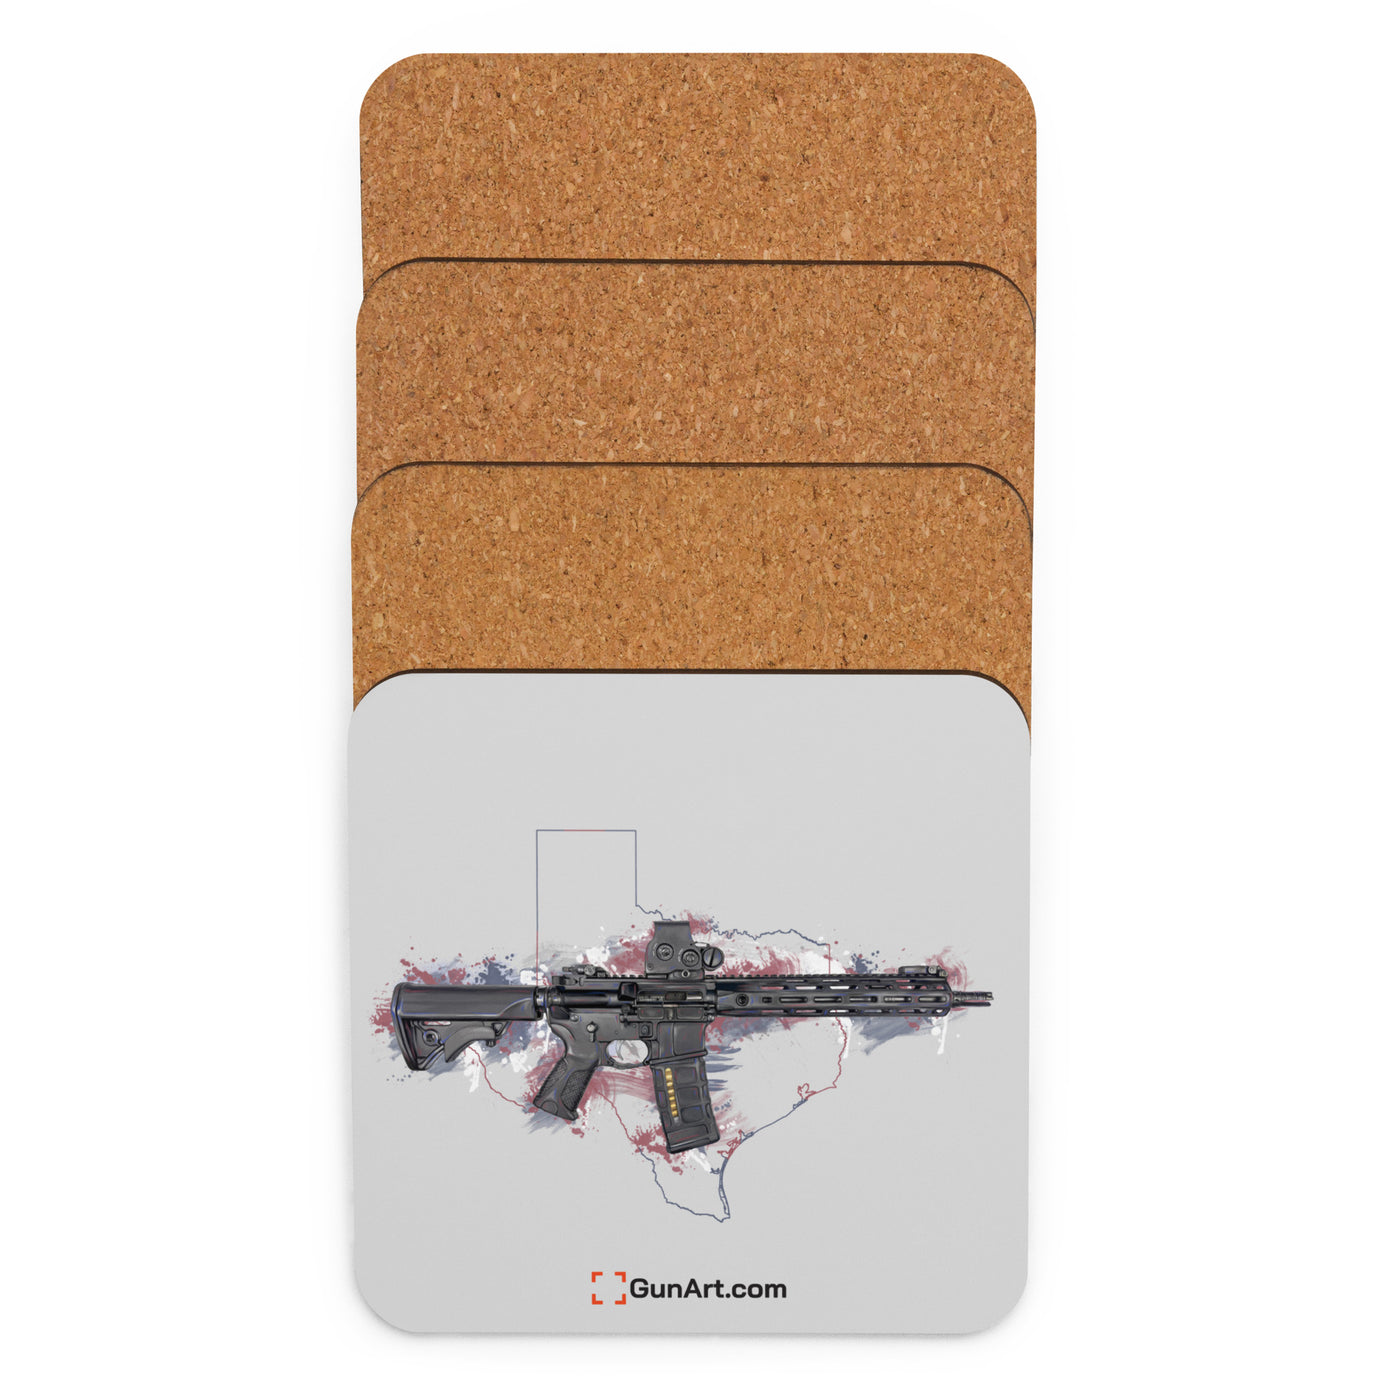 Defending Freedom - Texas - AR-15 State Cork-back Coaster - Colored State